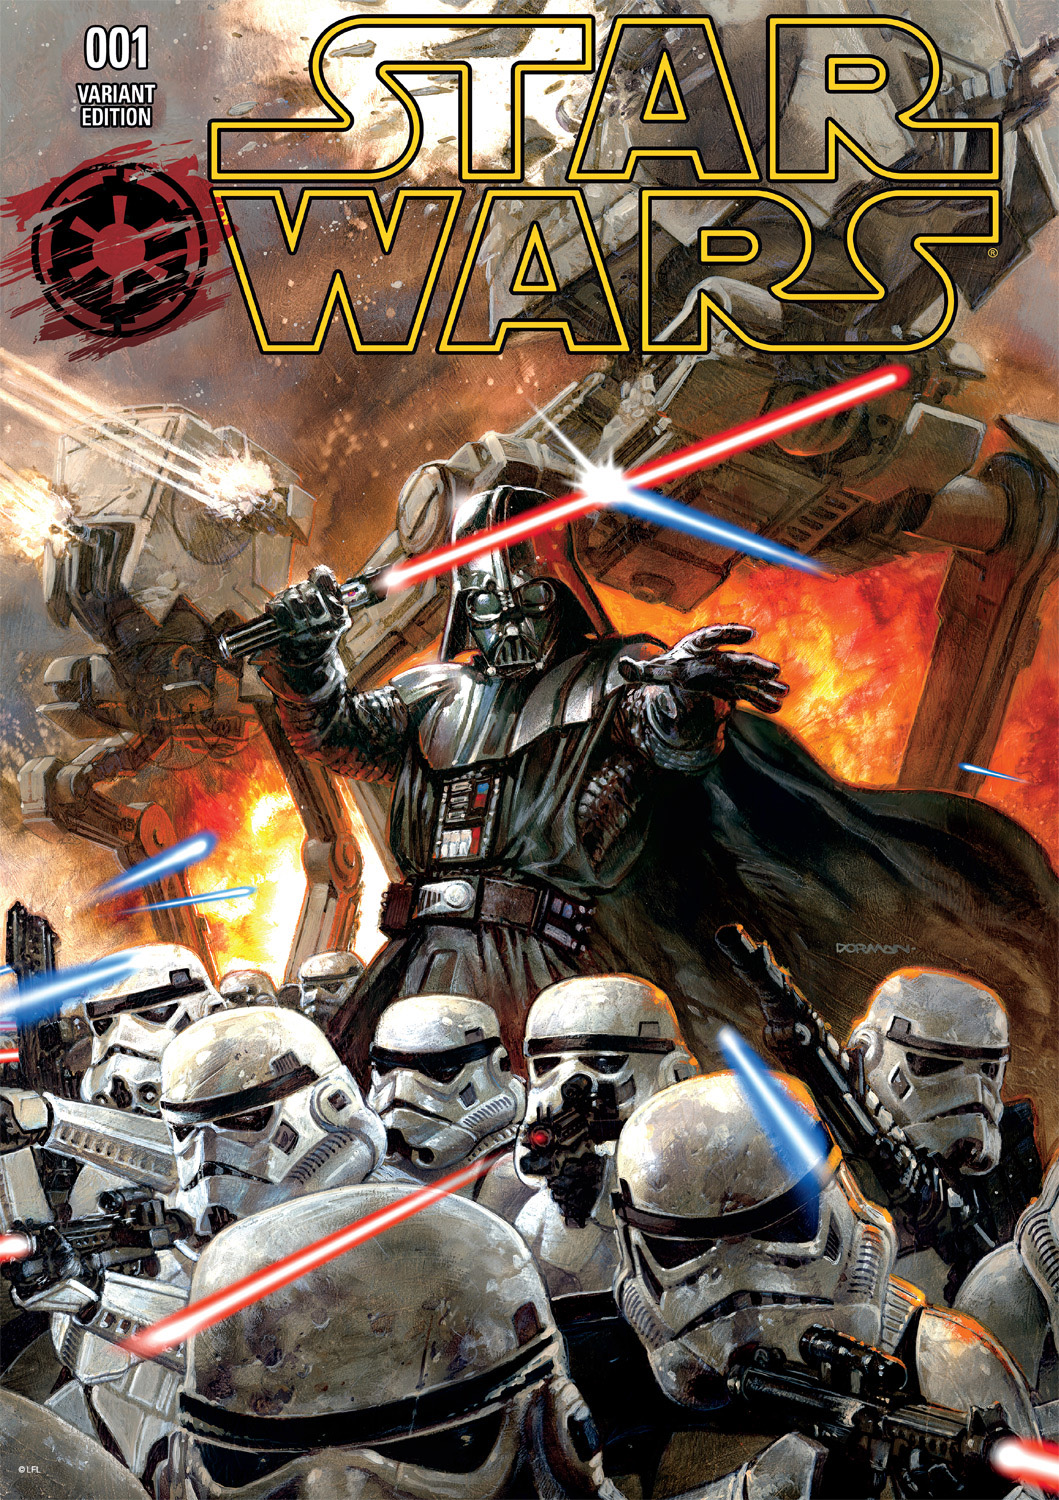 Darth Vader and the Imperial Army - Scratch and Dent Movies & TV Jigsaw Puzzle